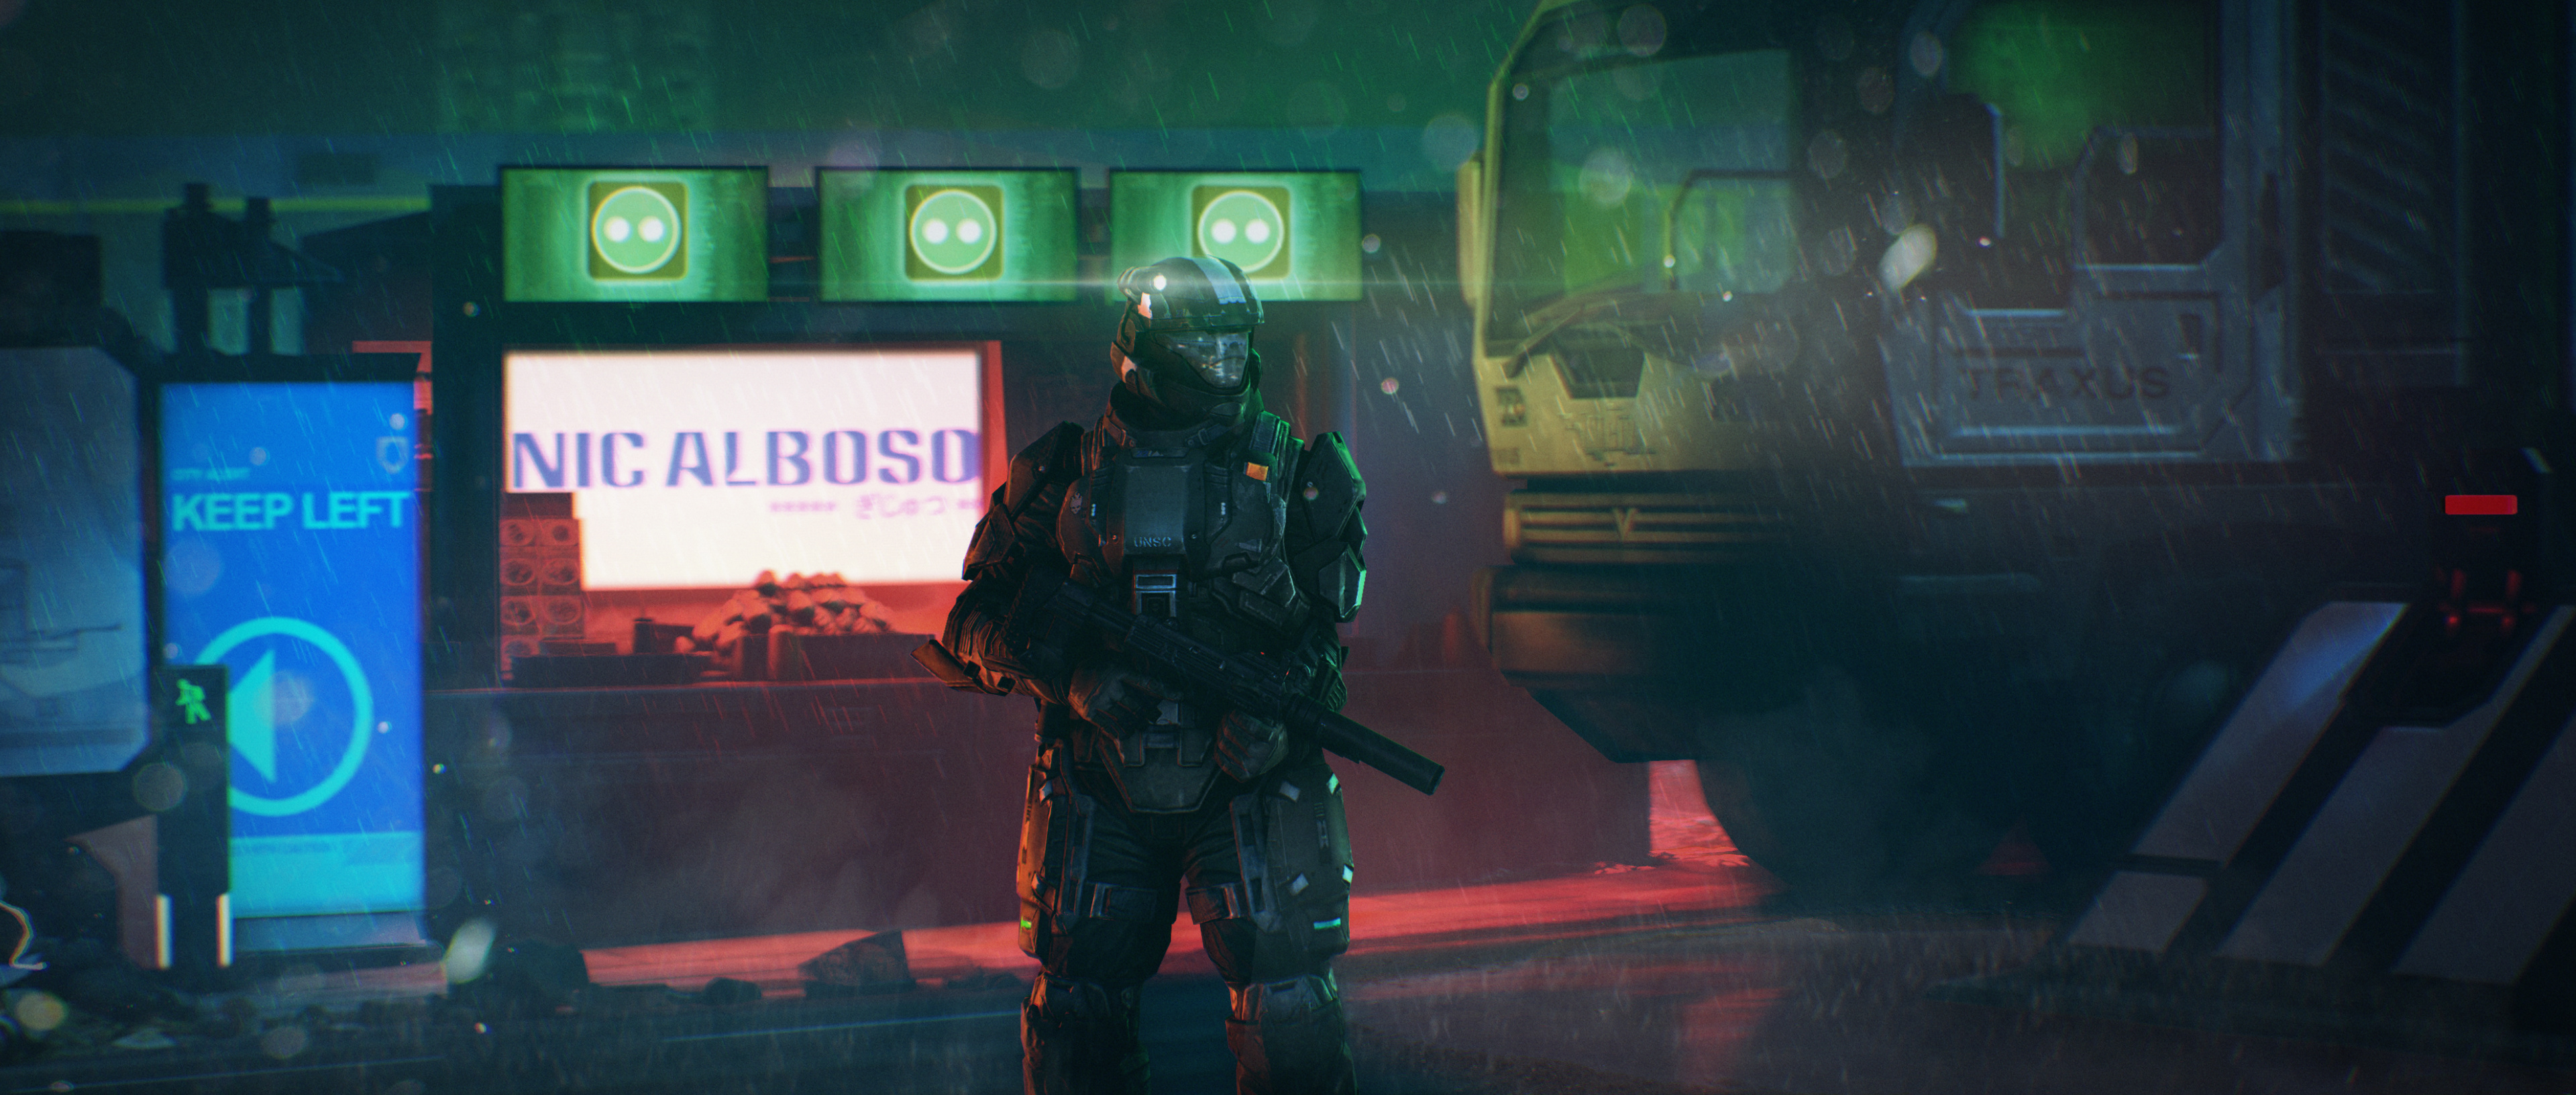 Halo 3: ODST, Best sale, Limited time offer, Special discount, 3840x1640 Dual Screen Desktop